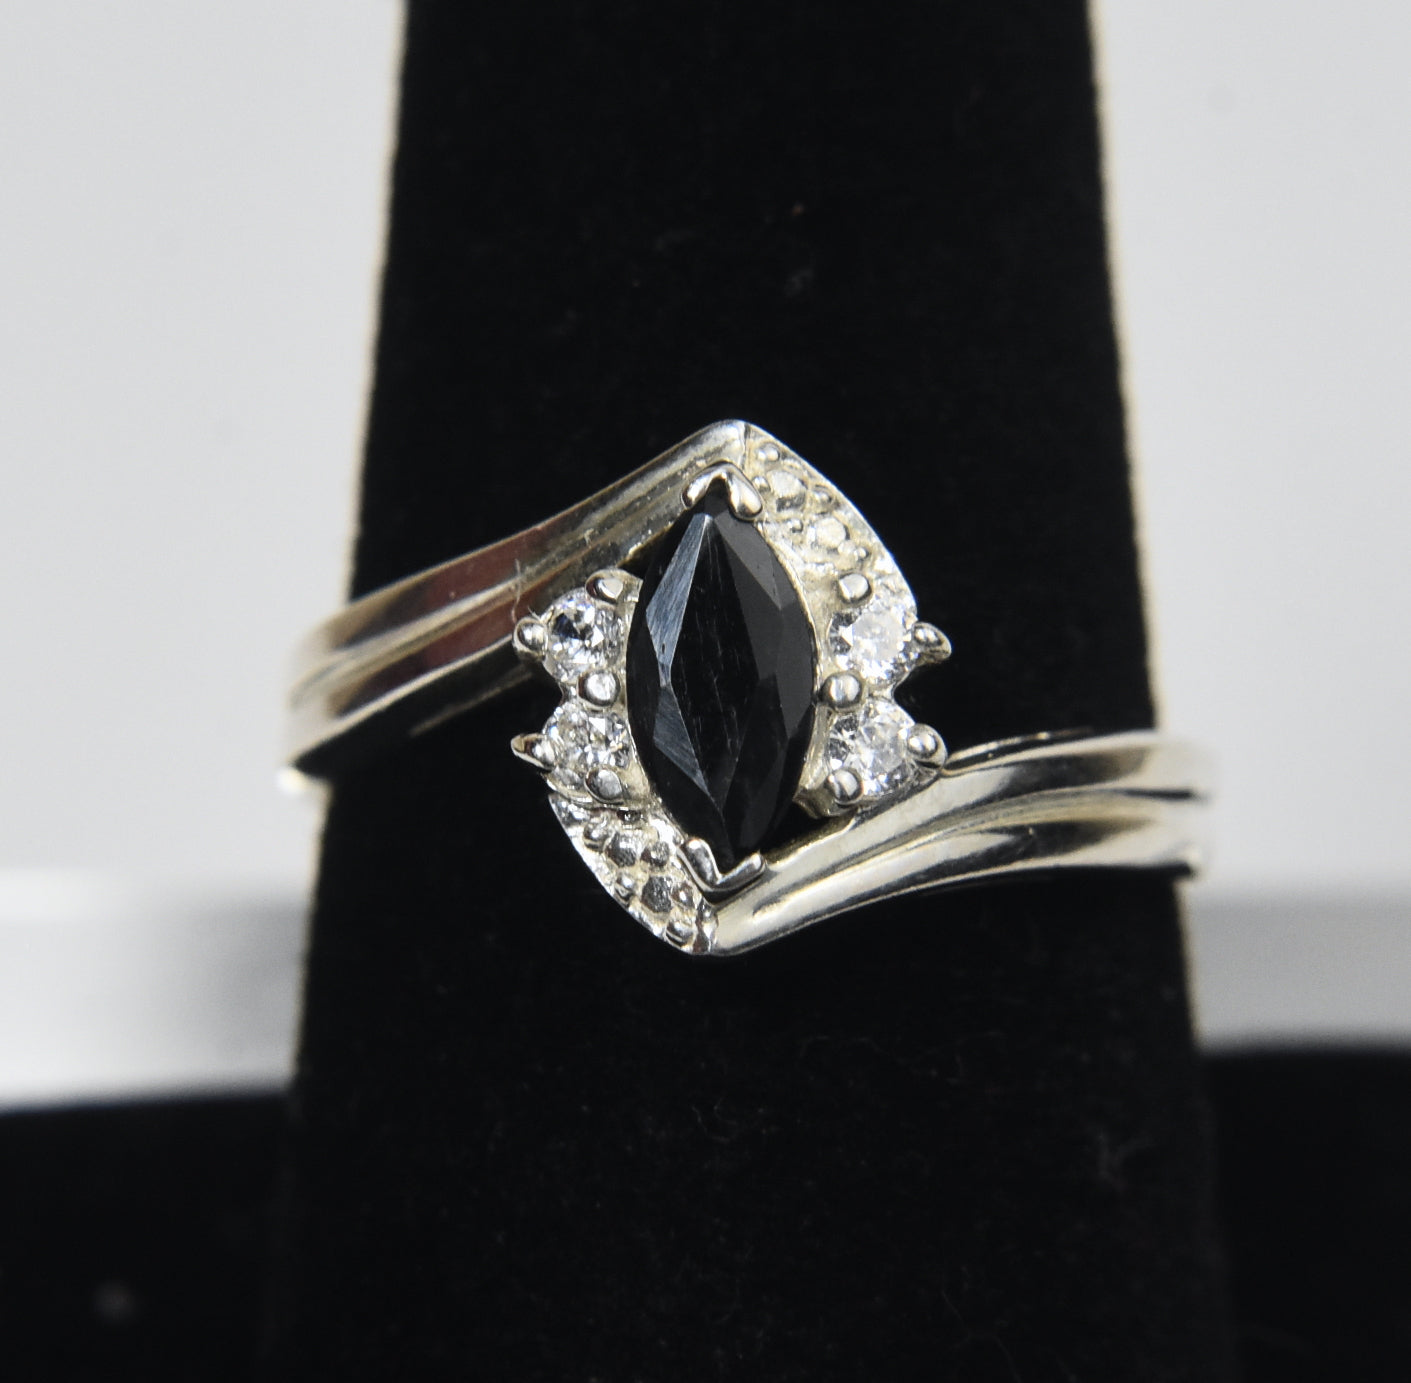 Sterling Silver Ring with Very Dark Blue Sapphire - Size 8